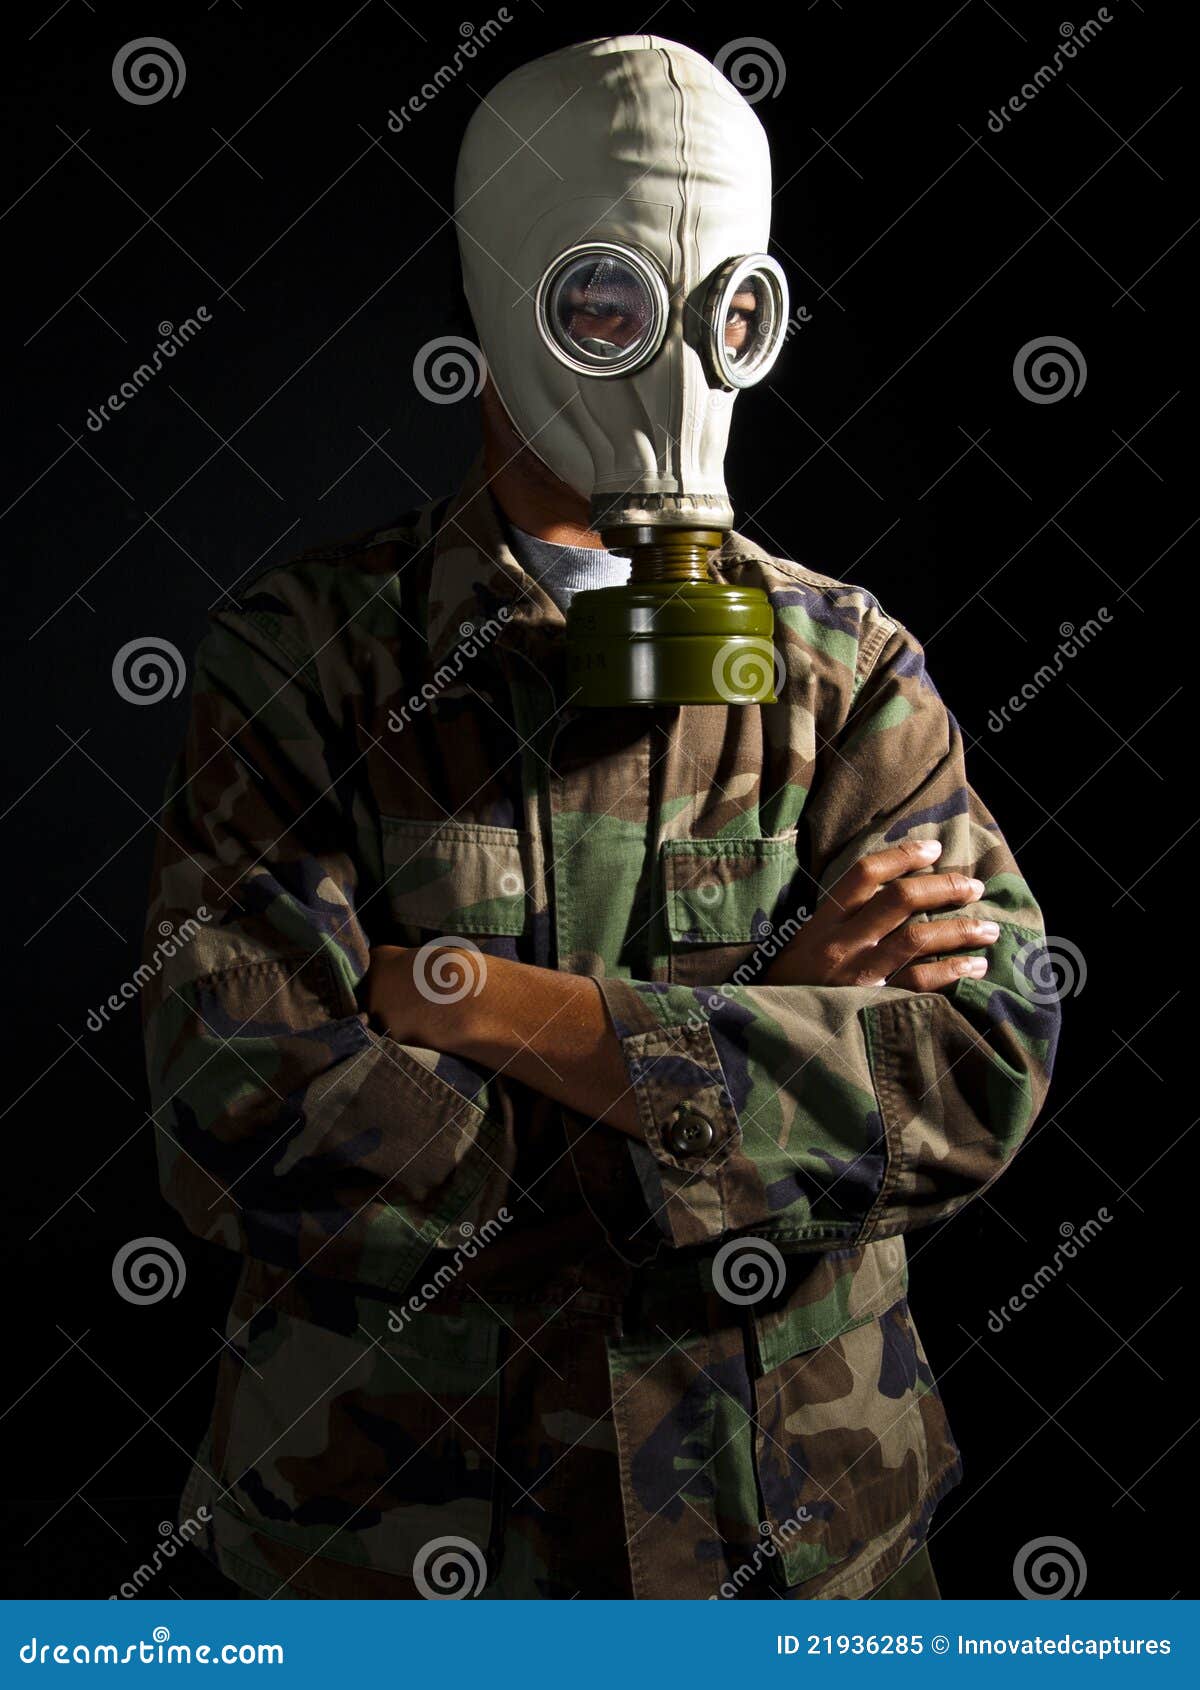 https://thumbs.dreamstime.com/z/soldier-nuclear-apocalypse-21936285.jpg